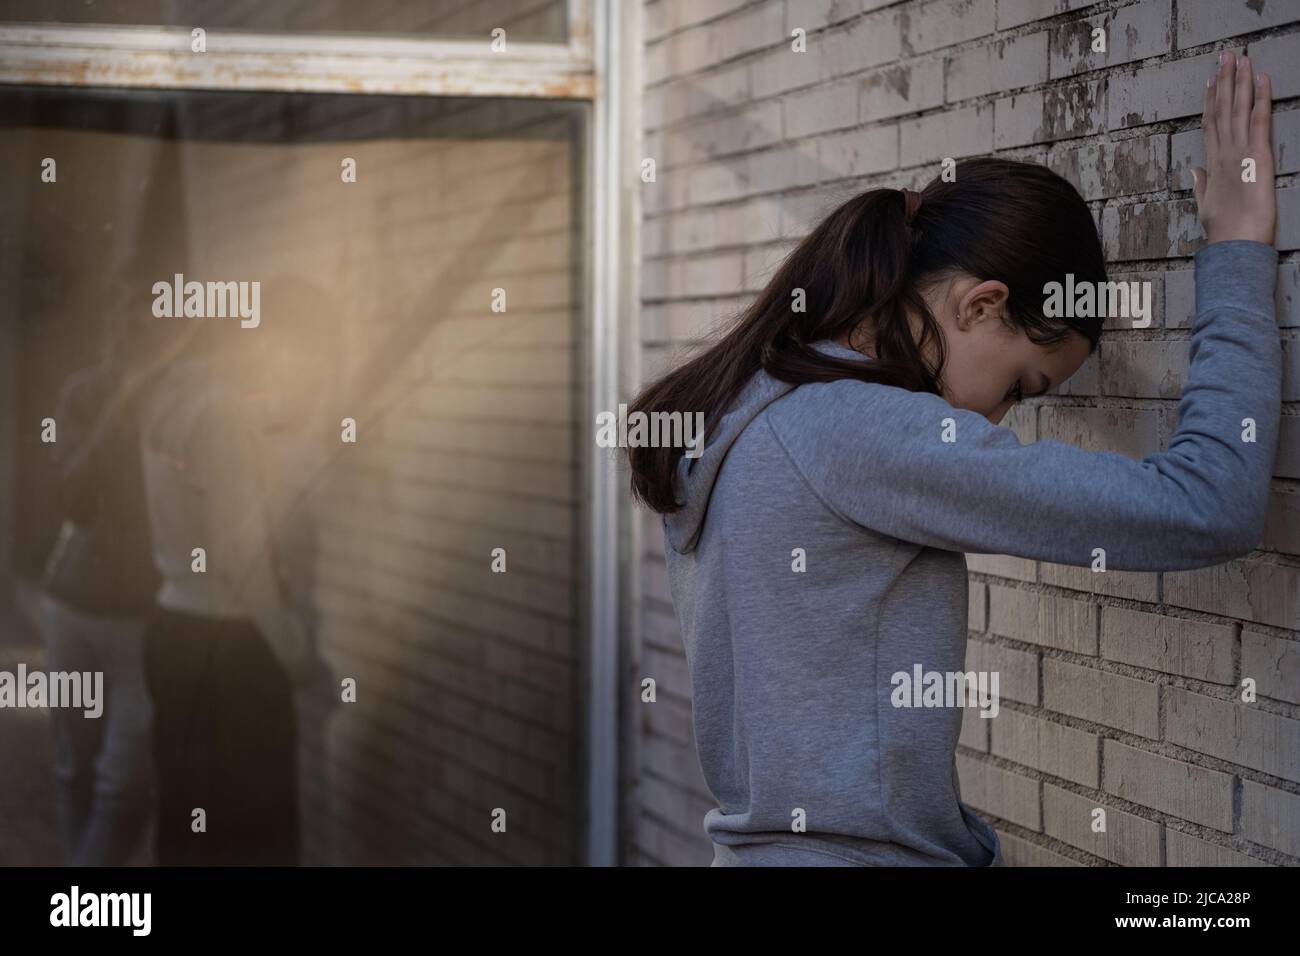 Unhappy young couple. Reflected on glass a boy stands next to a depressed girl. Stock Photo